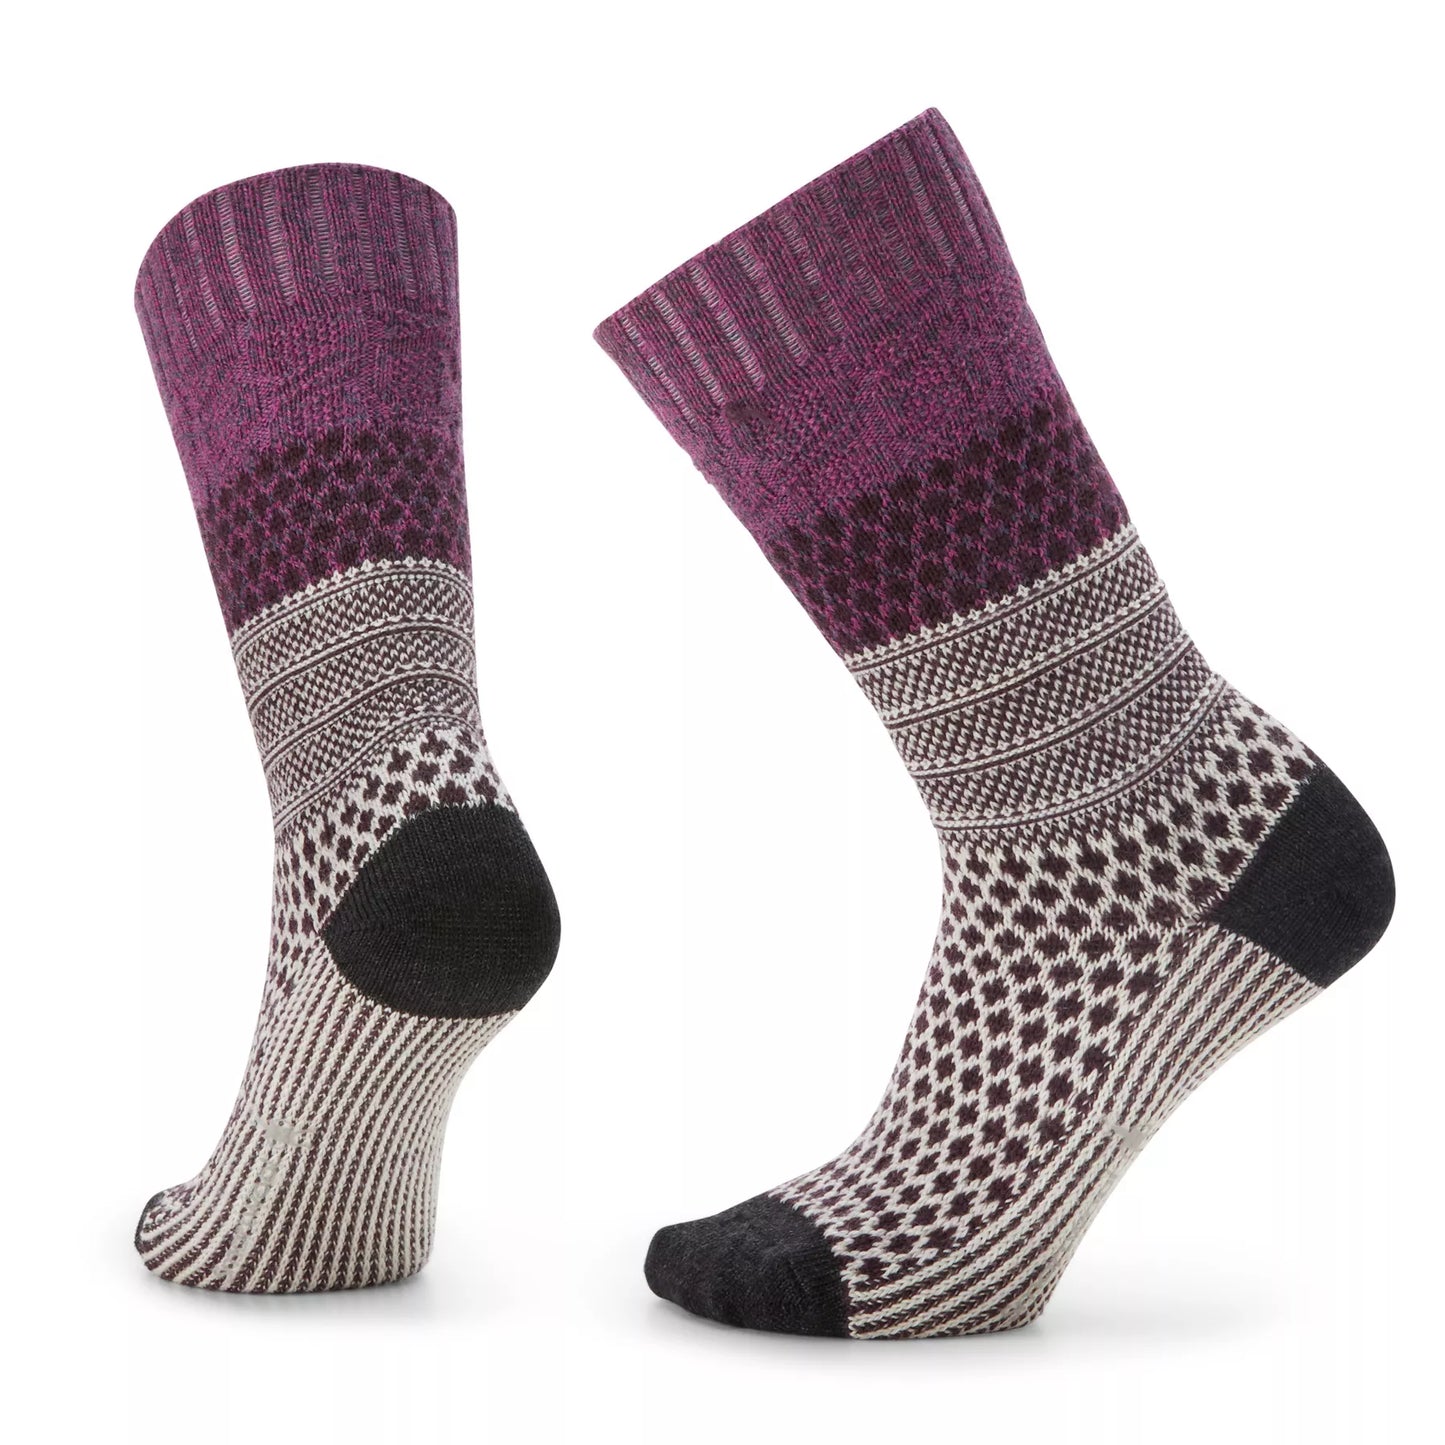 Smartwool Everyday Popcorn Cable Full Cushion Crew Socks - Meadow Mauve